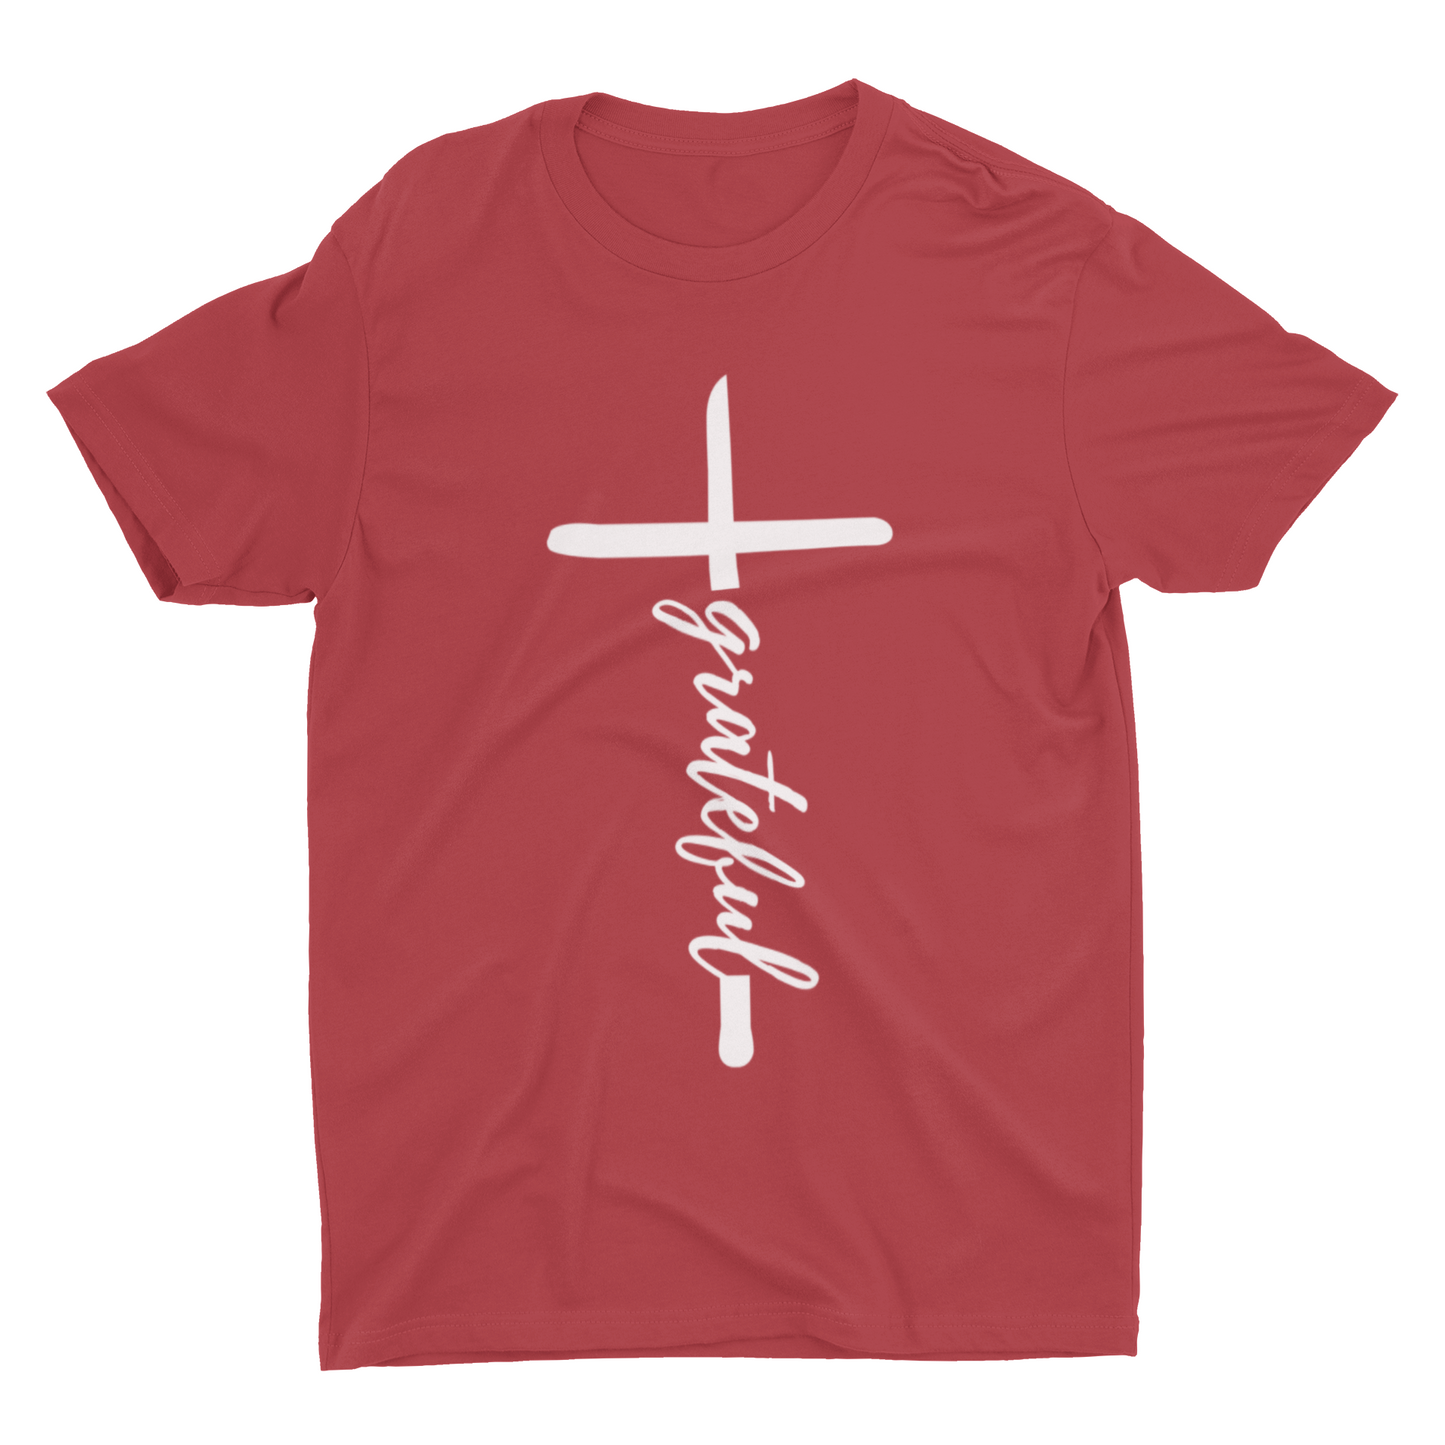 Grateful cross graphic t-shirt for fall